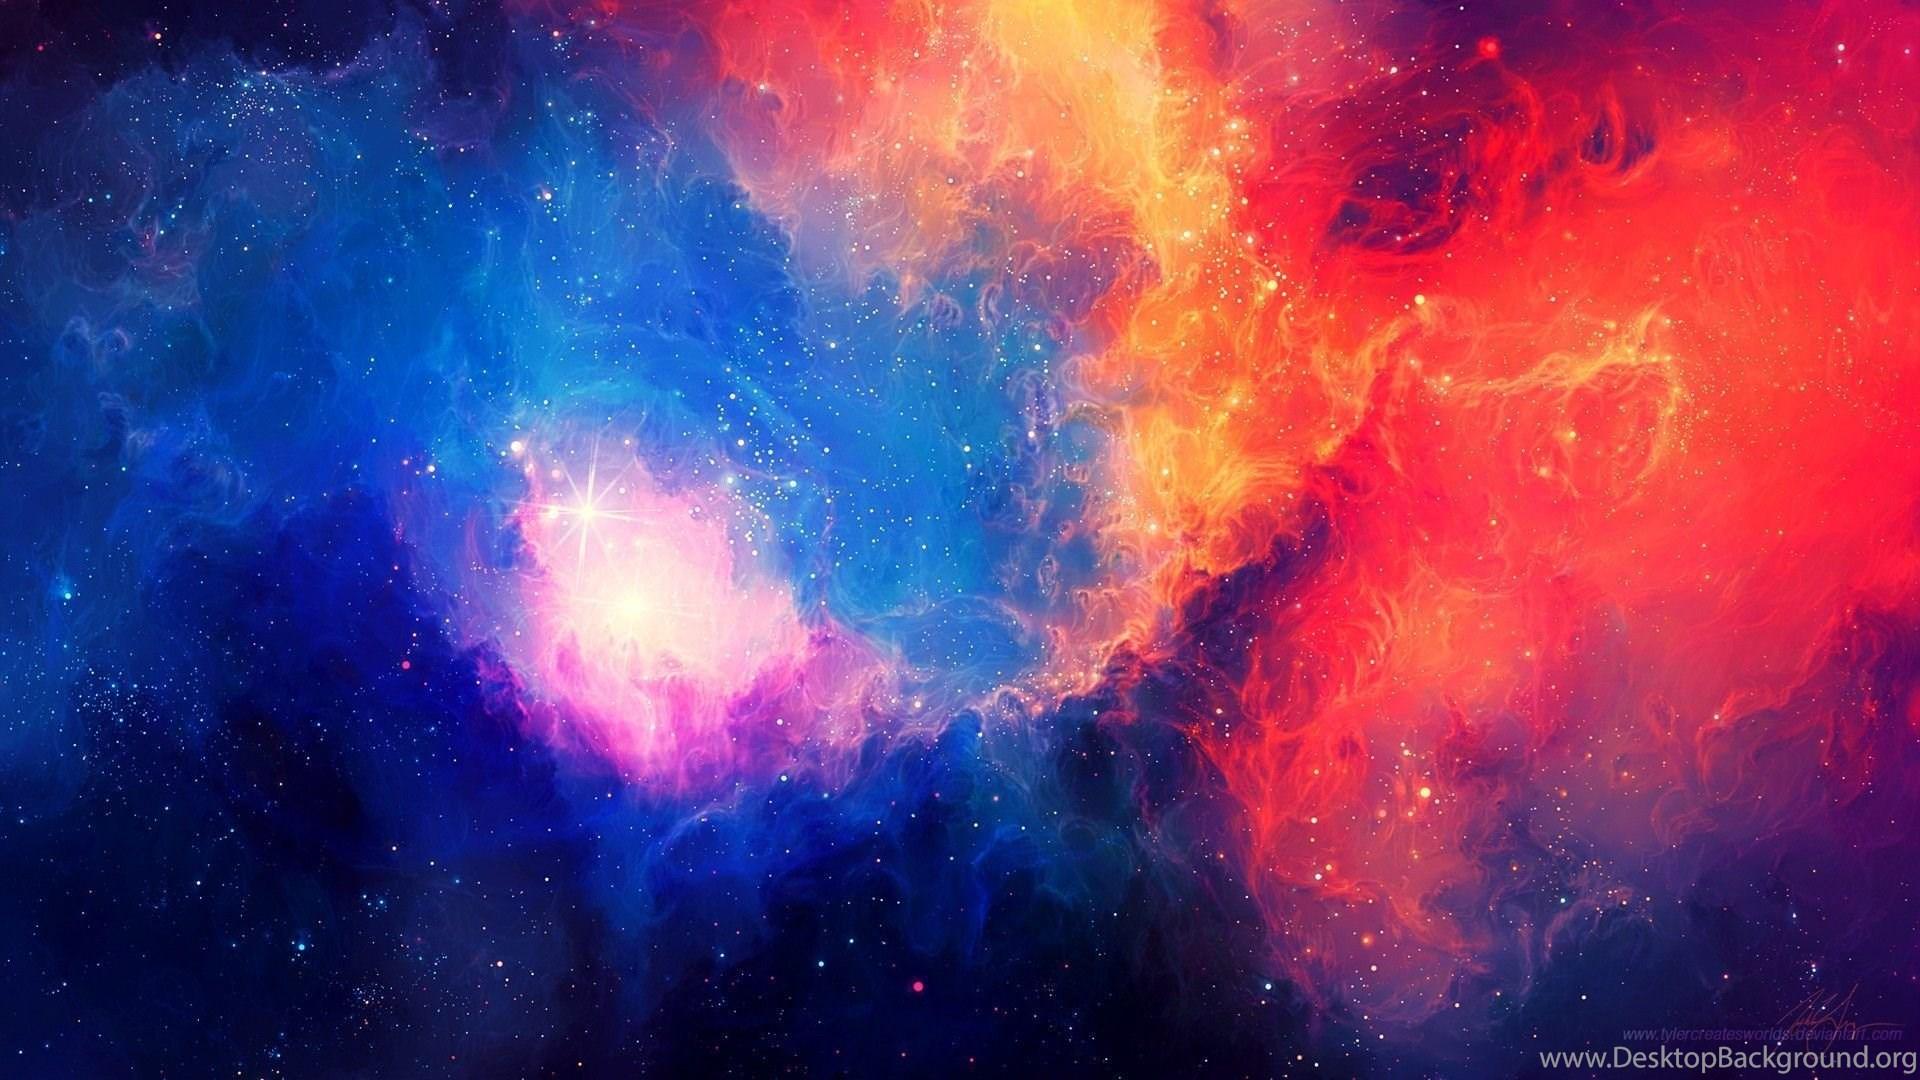 Galaxy, Wallpaper, Space, Cat, Wallpapers, Image, Colorful 2008593